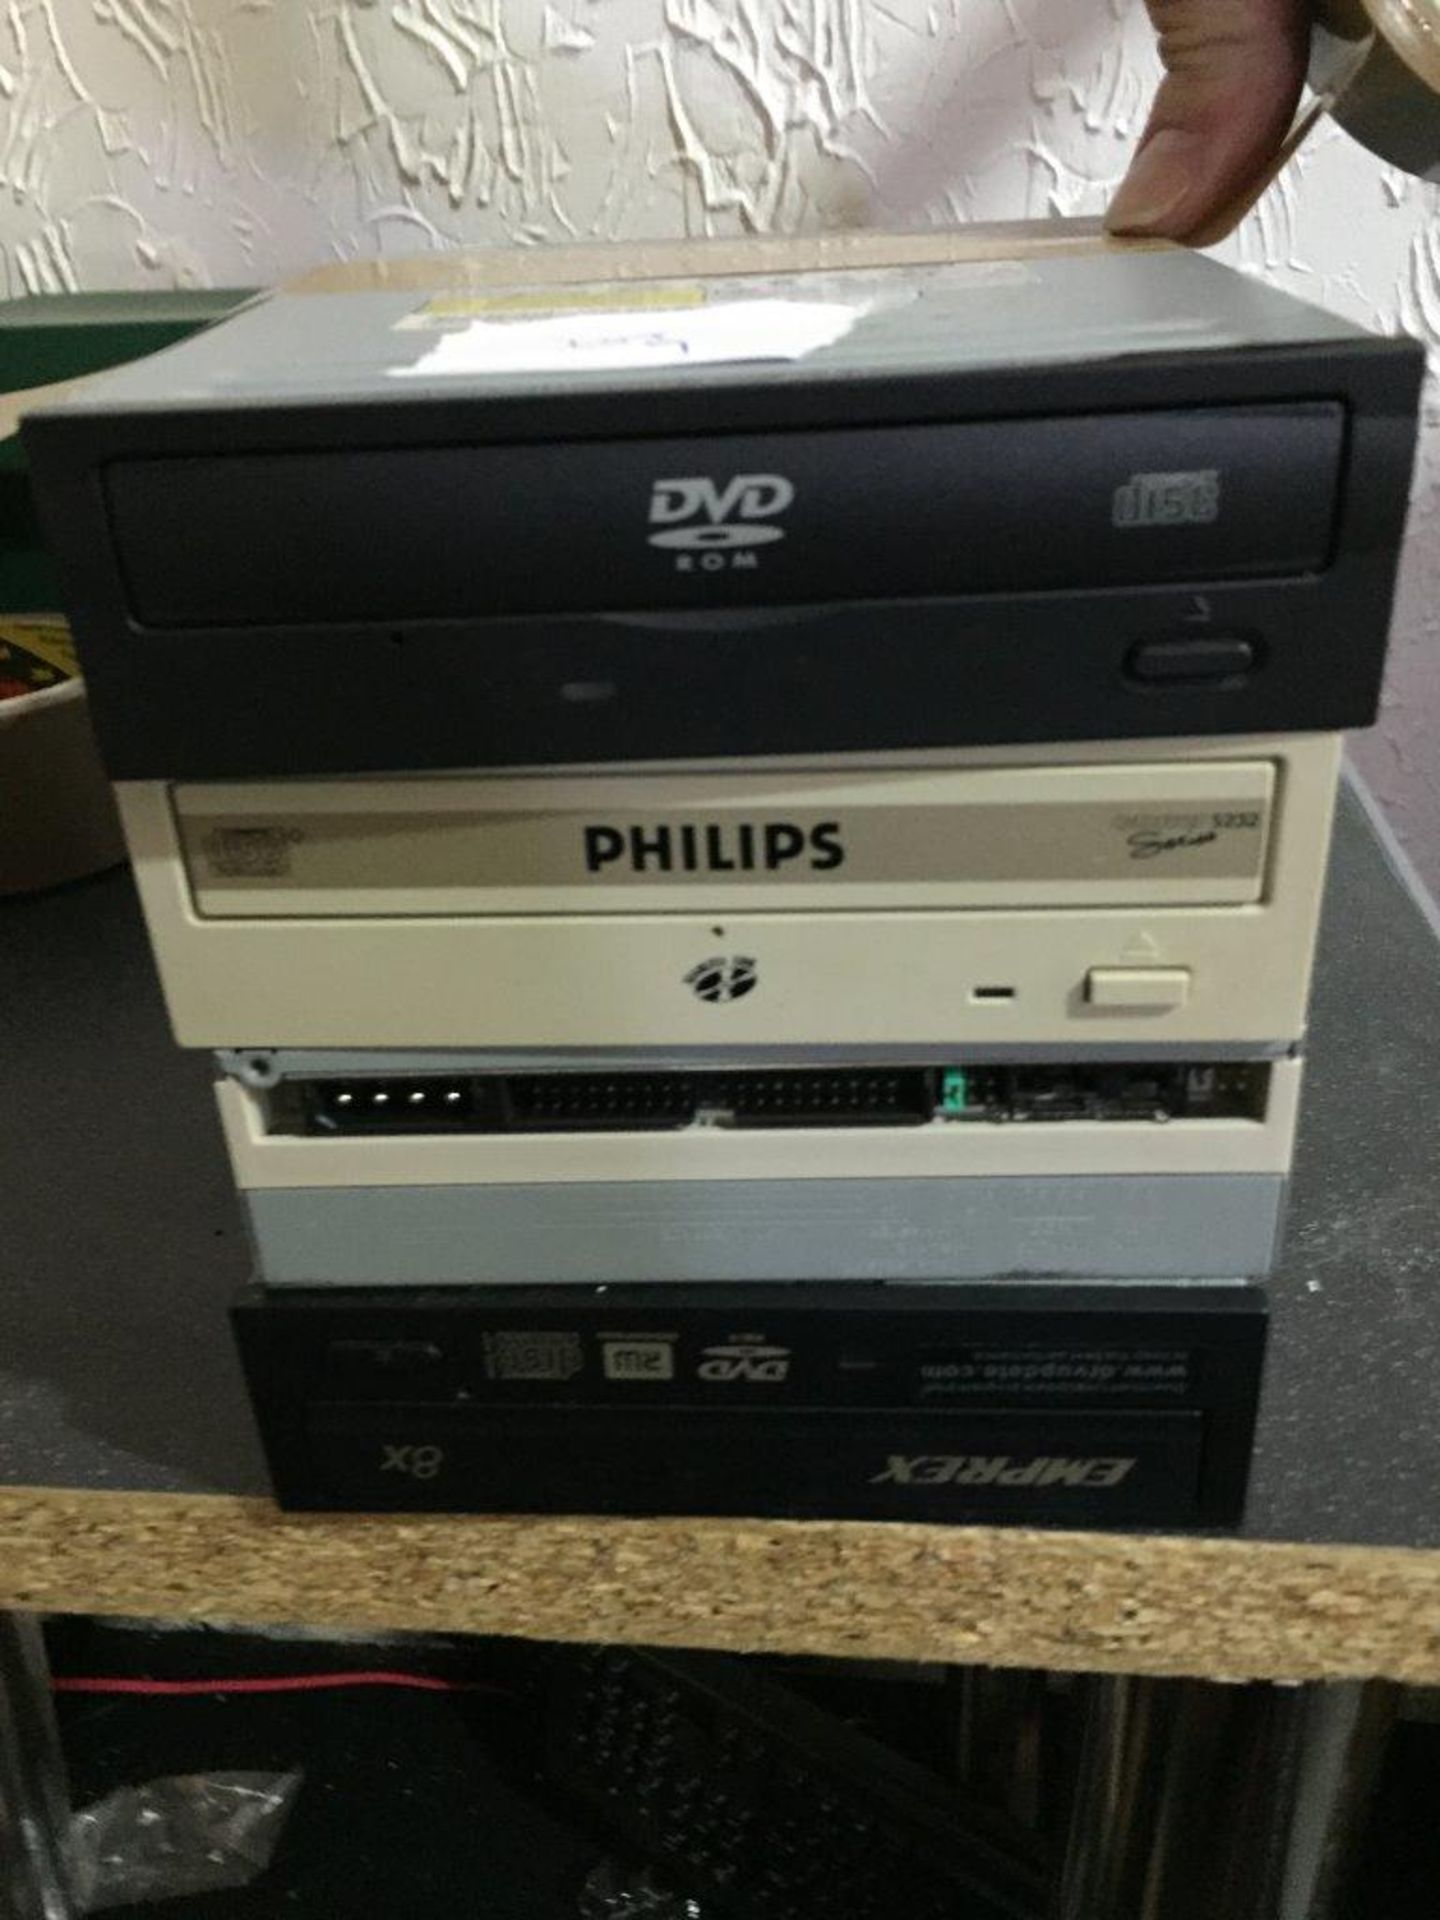 17 X CD/DVD DRIVES FOR COMPUTERS - Image 6 of 6